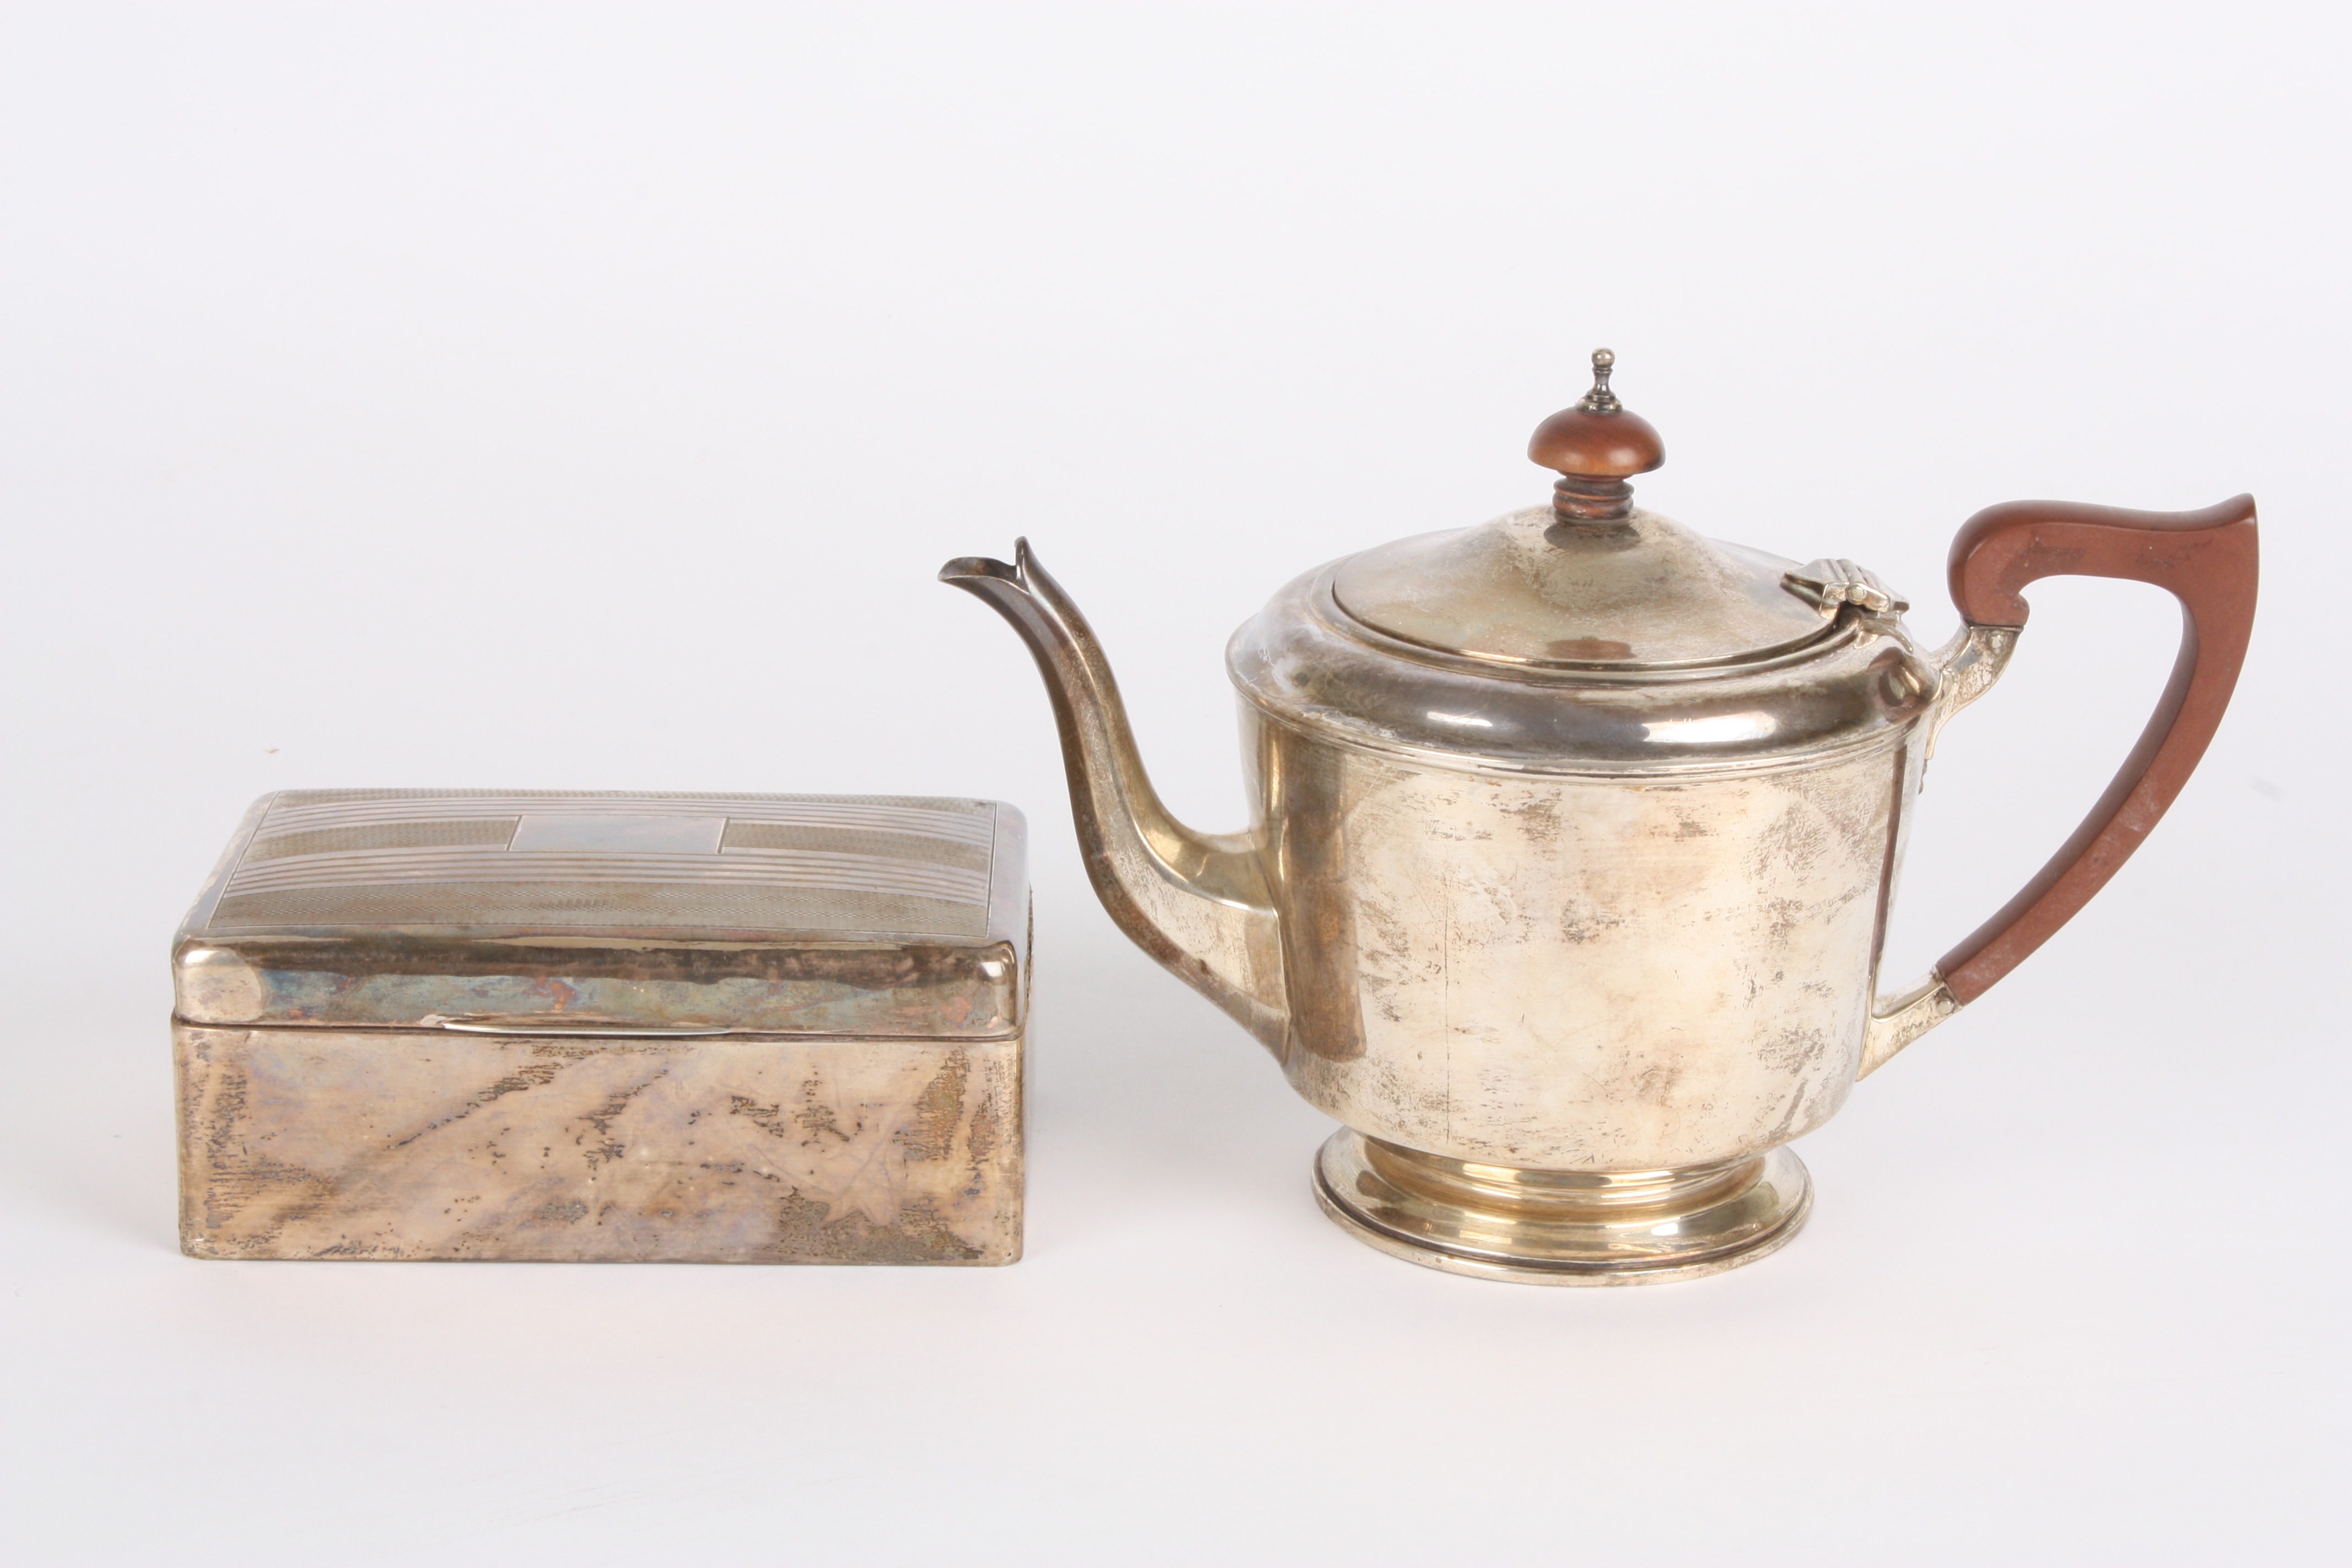 A Birmingham silver bachelors teapot
of tapered form with wooden knop, together with an engine